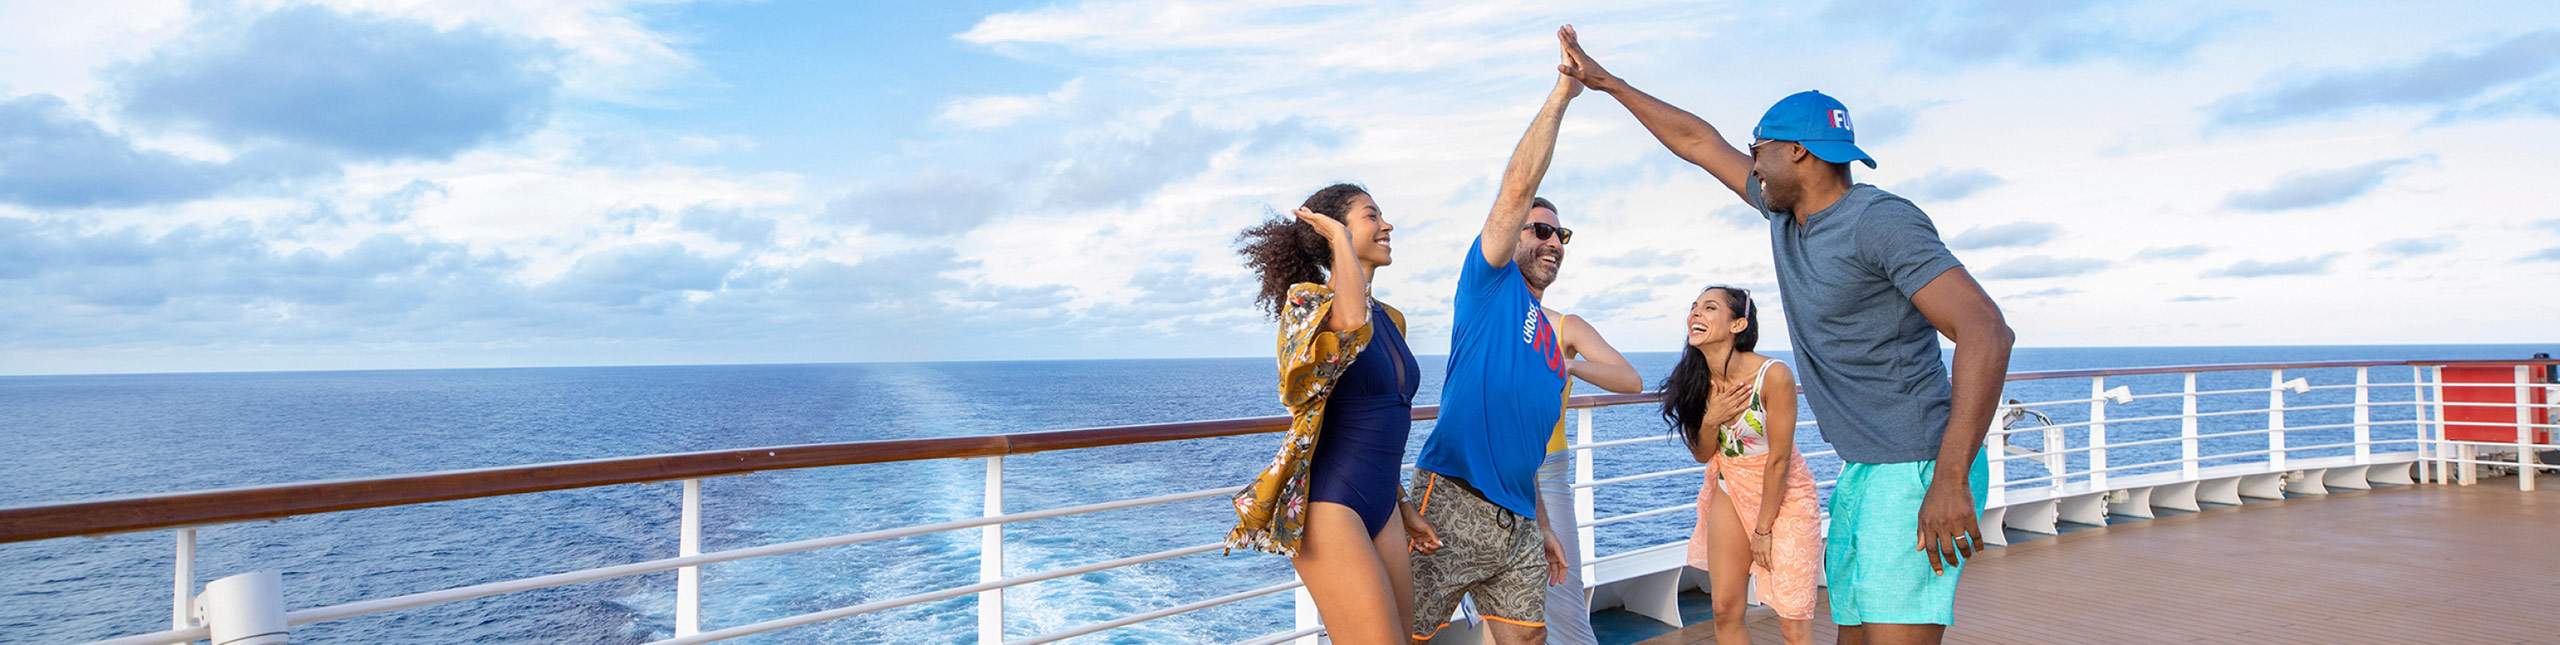 Friends high-fiving each other on a cruise ship